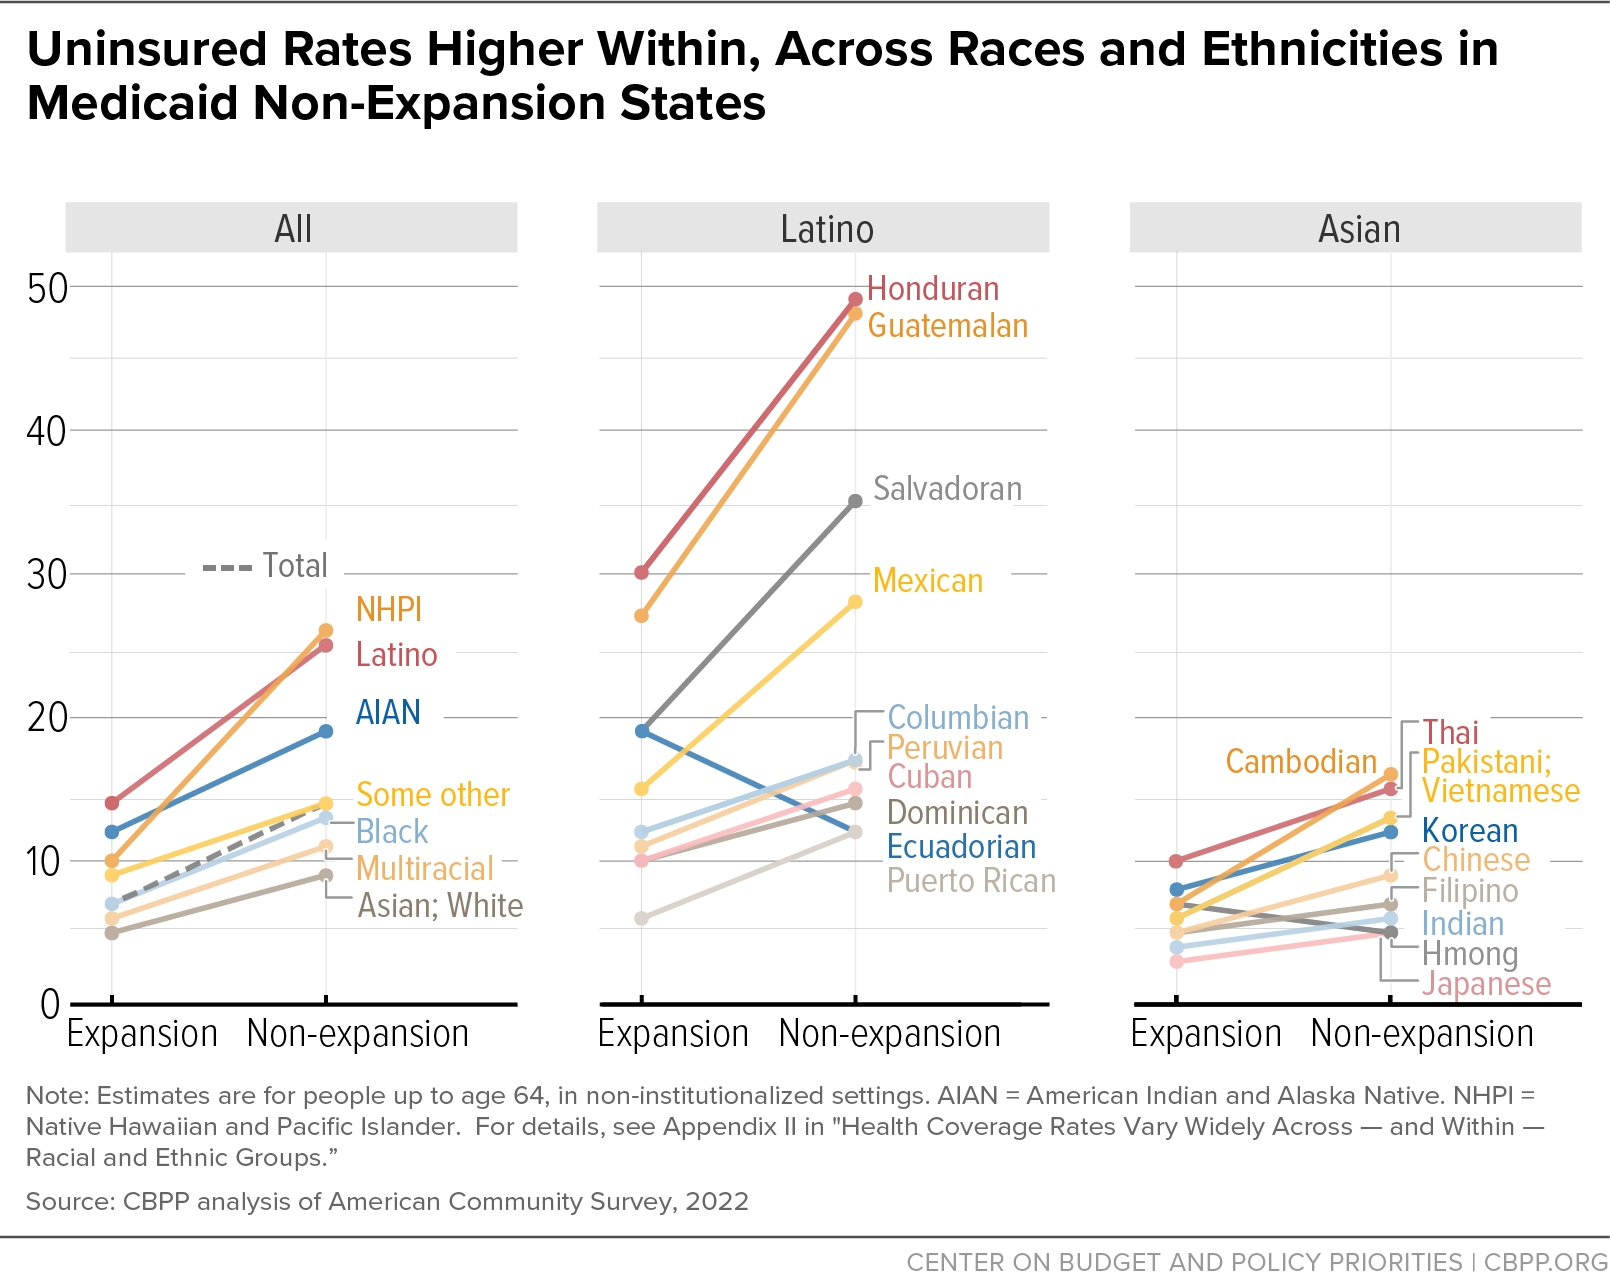 Uninsured Rates Higher Within, Across Races and Ethnicities in Medicaid Non-Expansion States